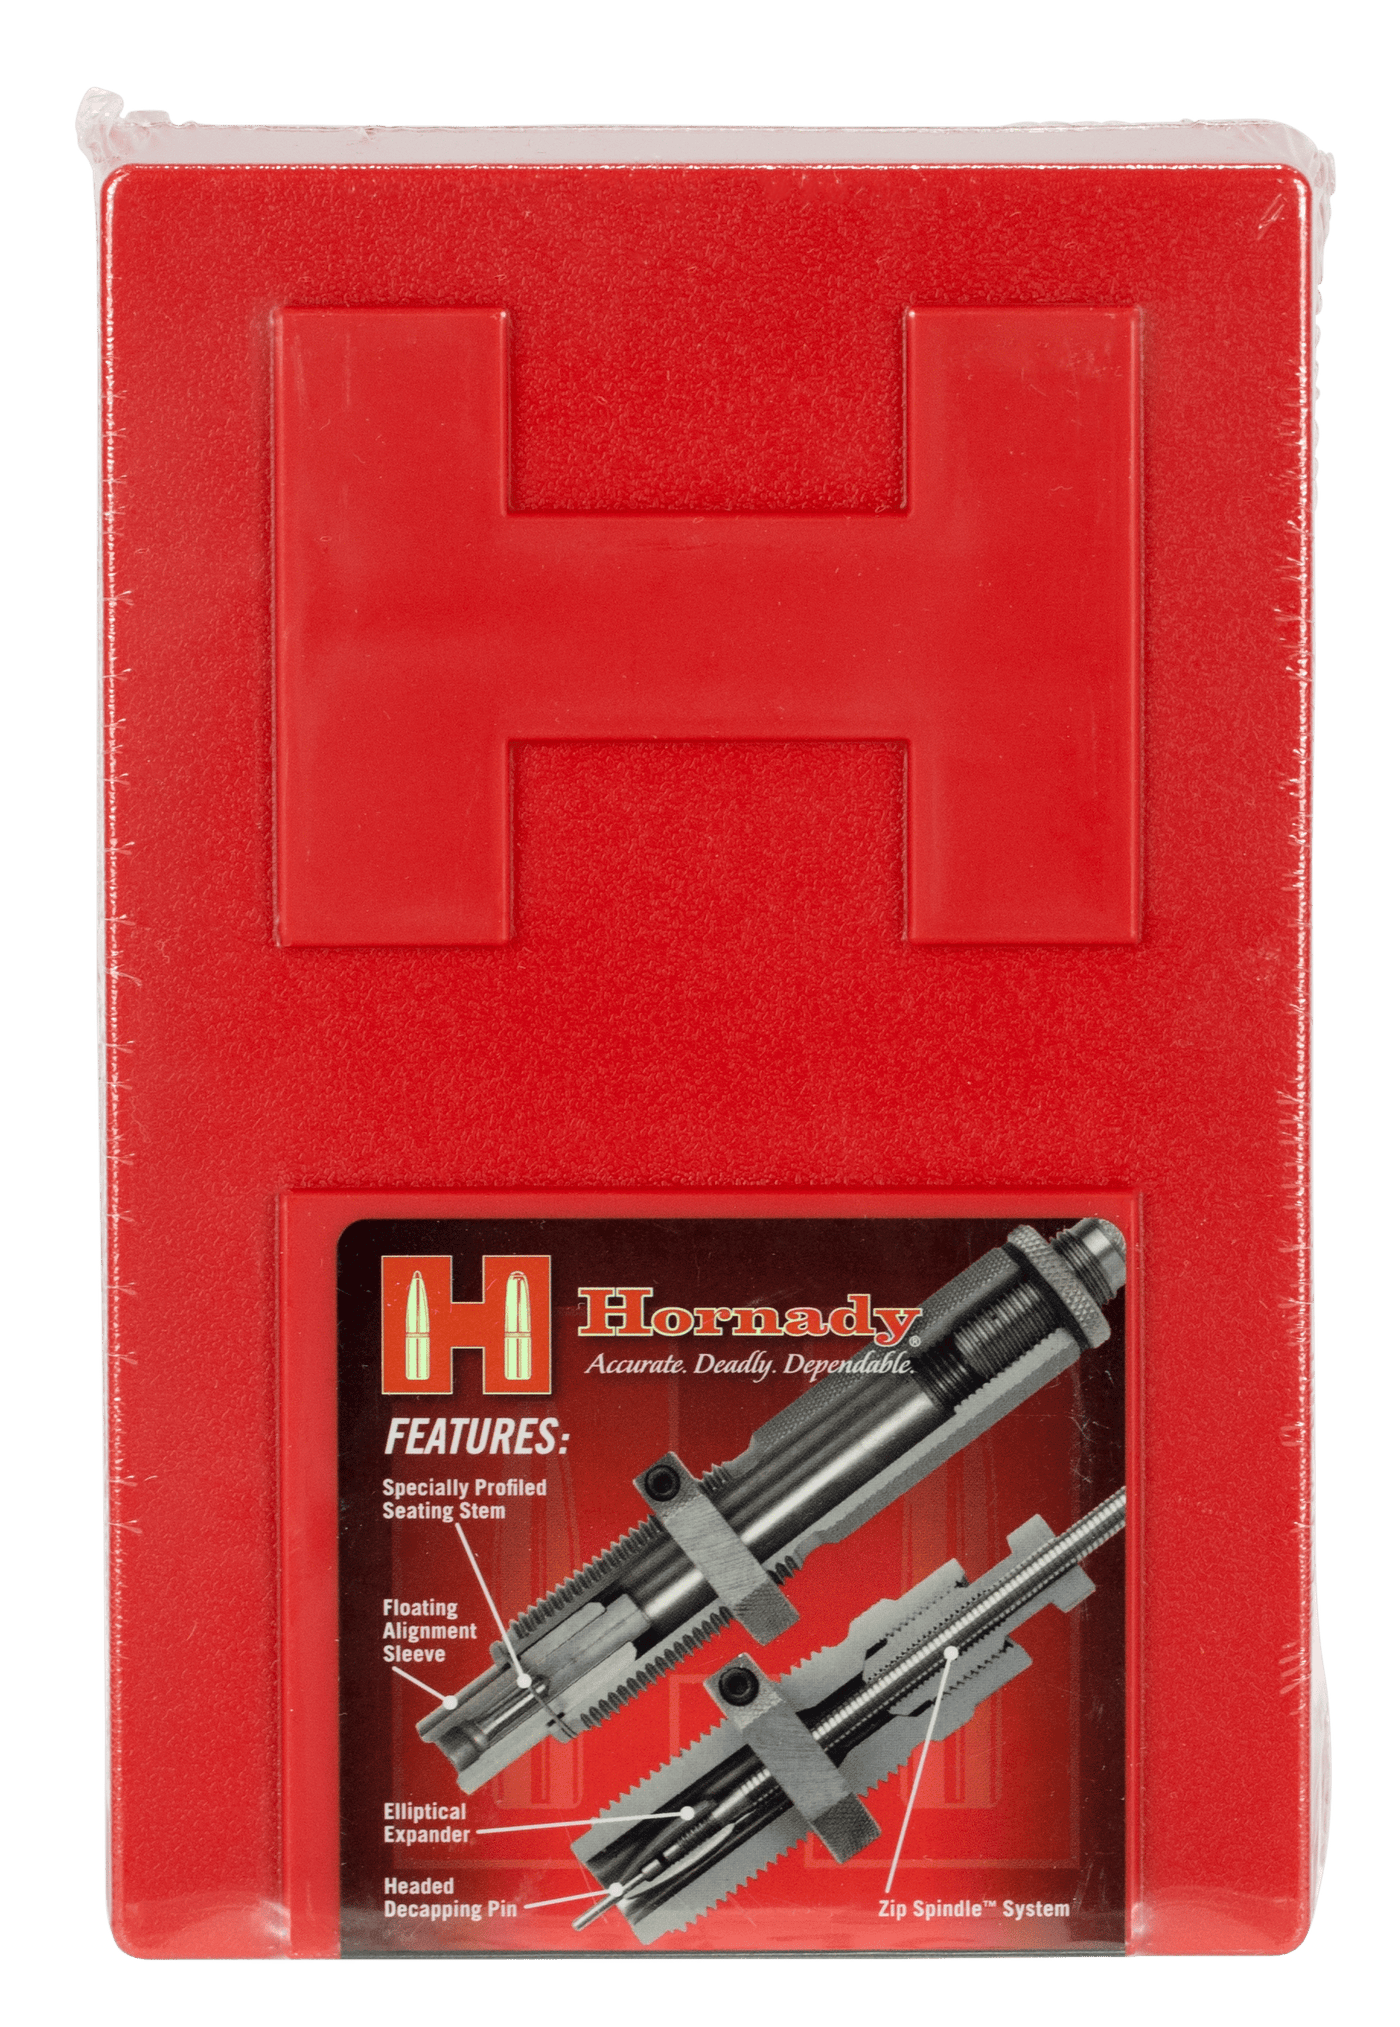 Hornady Hornady Series I Two-die Rifle Die Set 25-06 Rem. Reloading